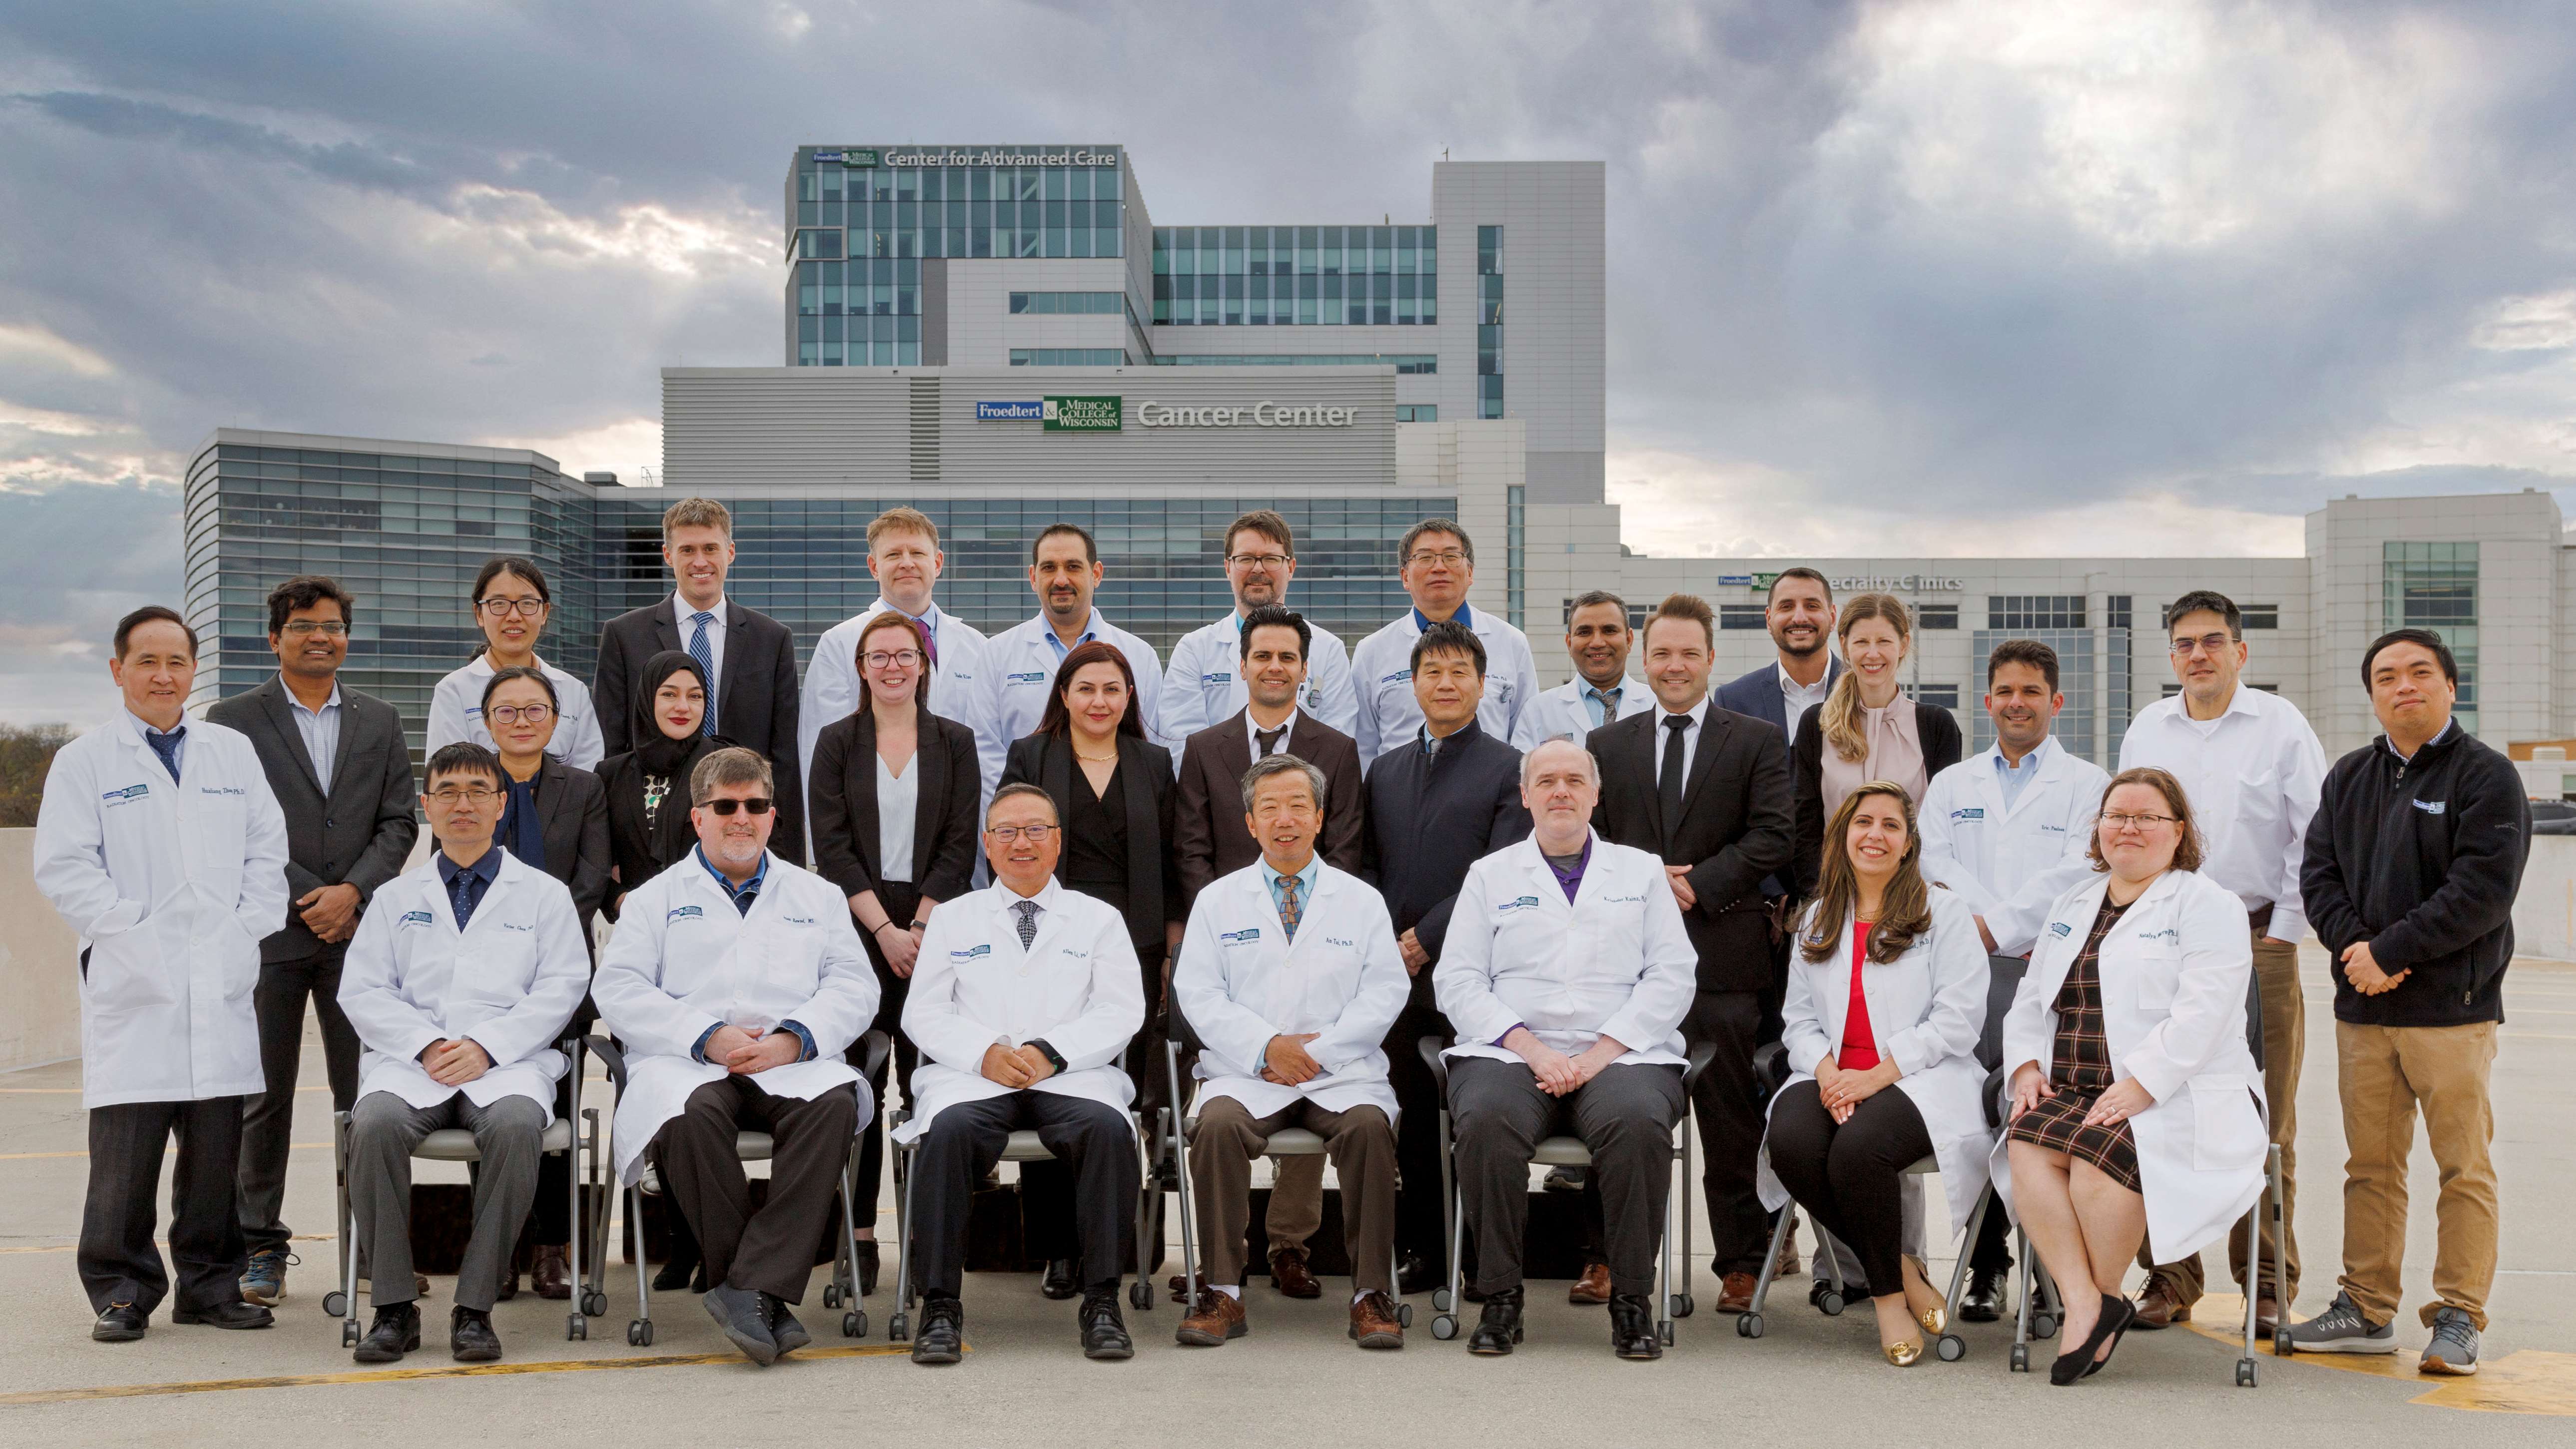 Radiation Oncology Therapy Physics Residency Program group